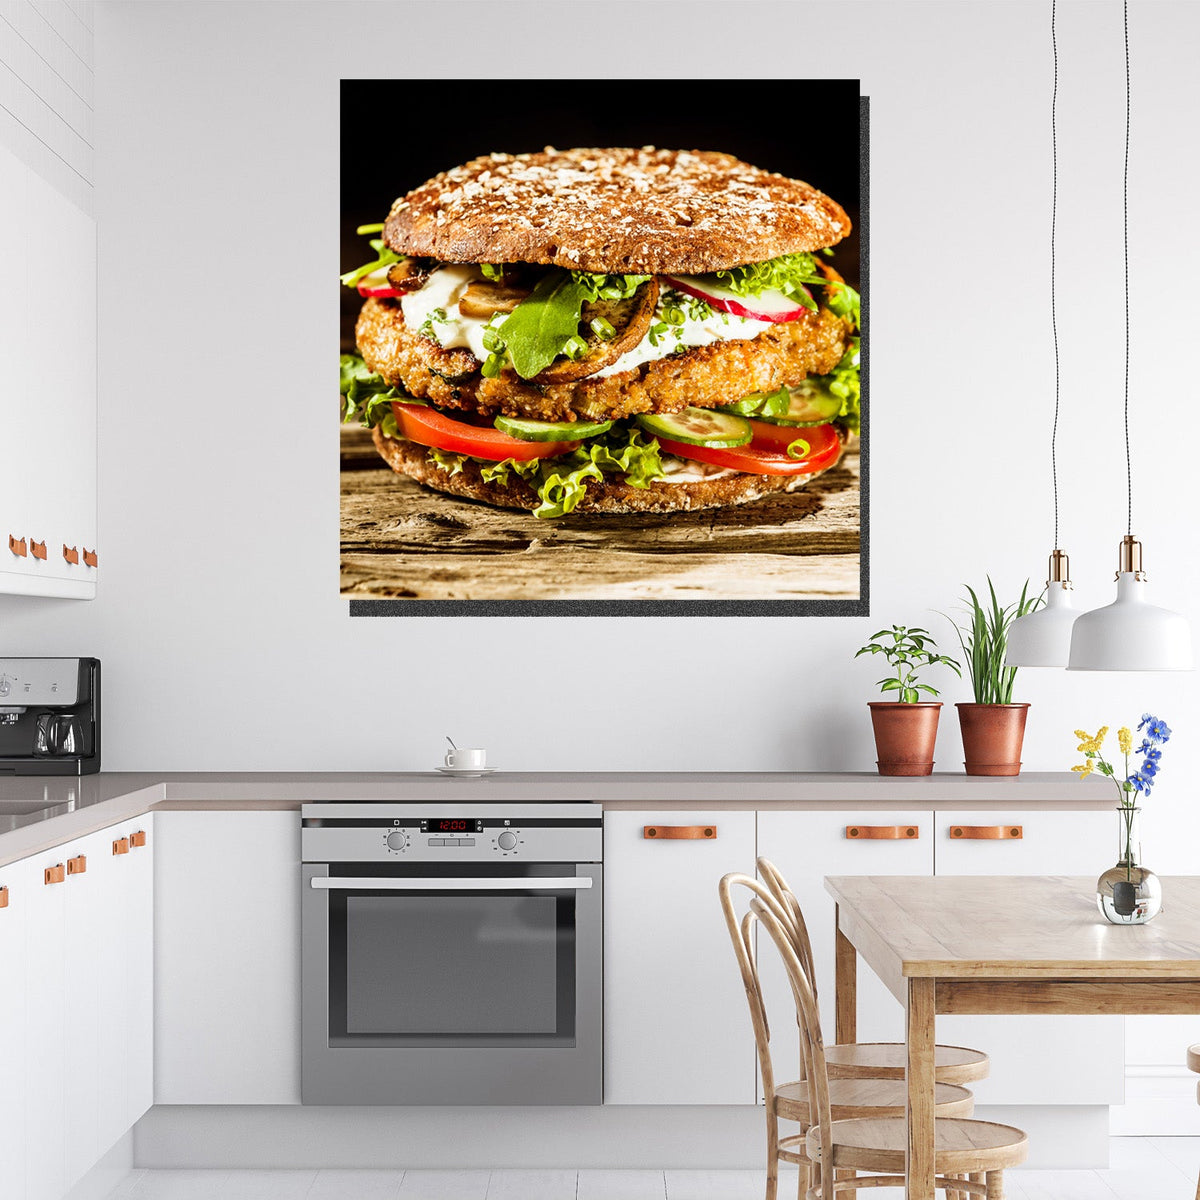 https://cdn.shopify.com/s/files/1/0387/9986/8044/products/HealthyBurgerCanvasArtprintStretched-4.jpg